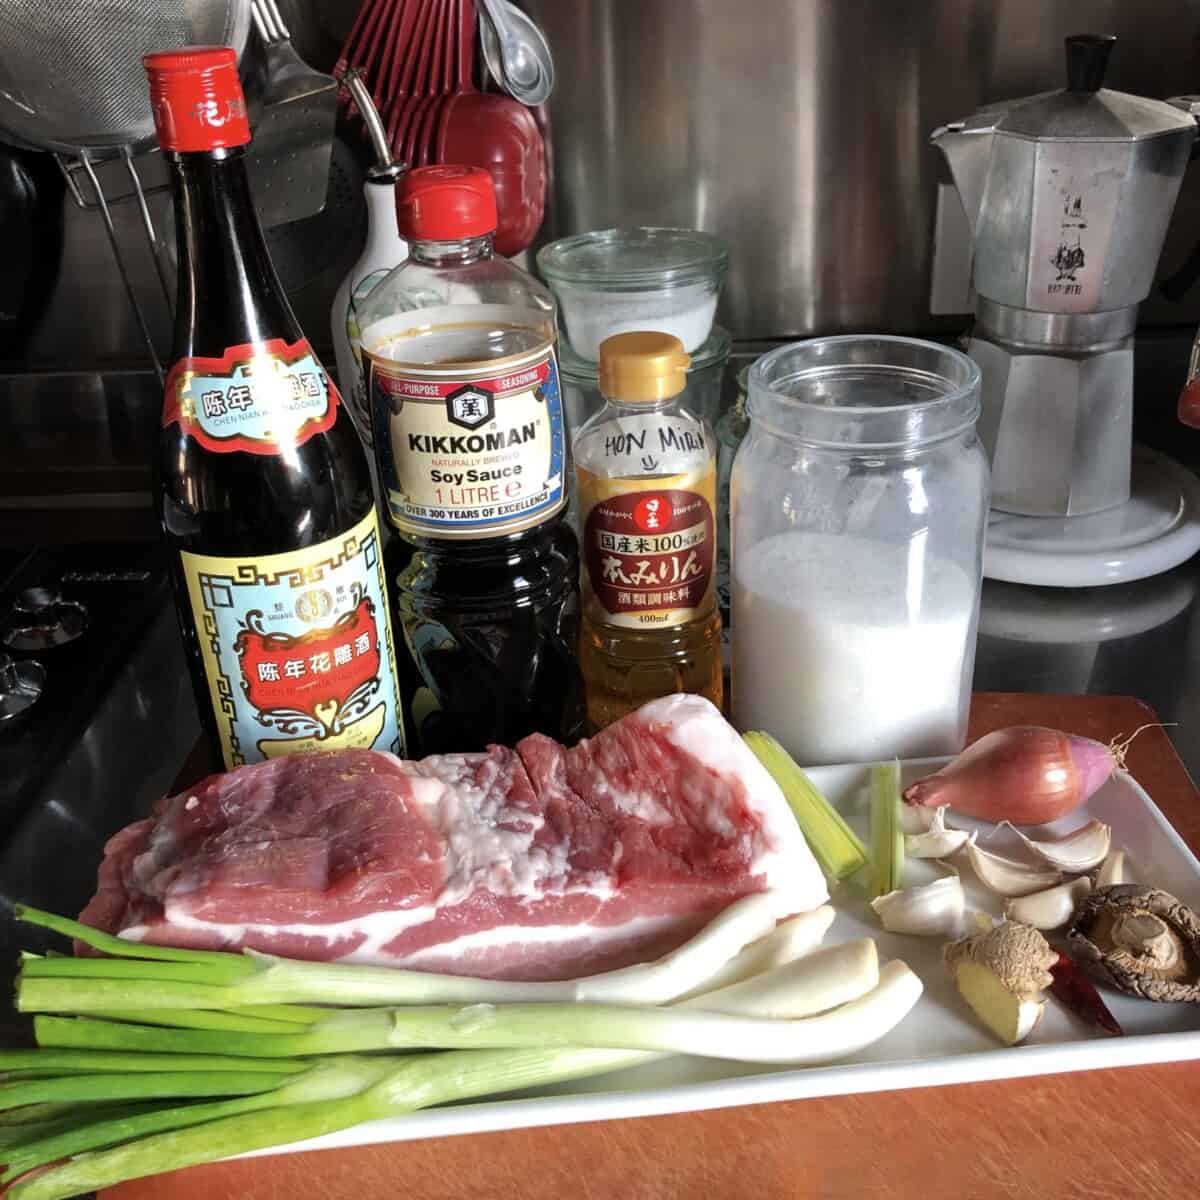 Pork chashsu ingredients on a cutting board with Shaoxing wine being substituted for sake.